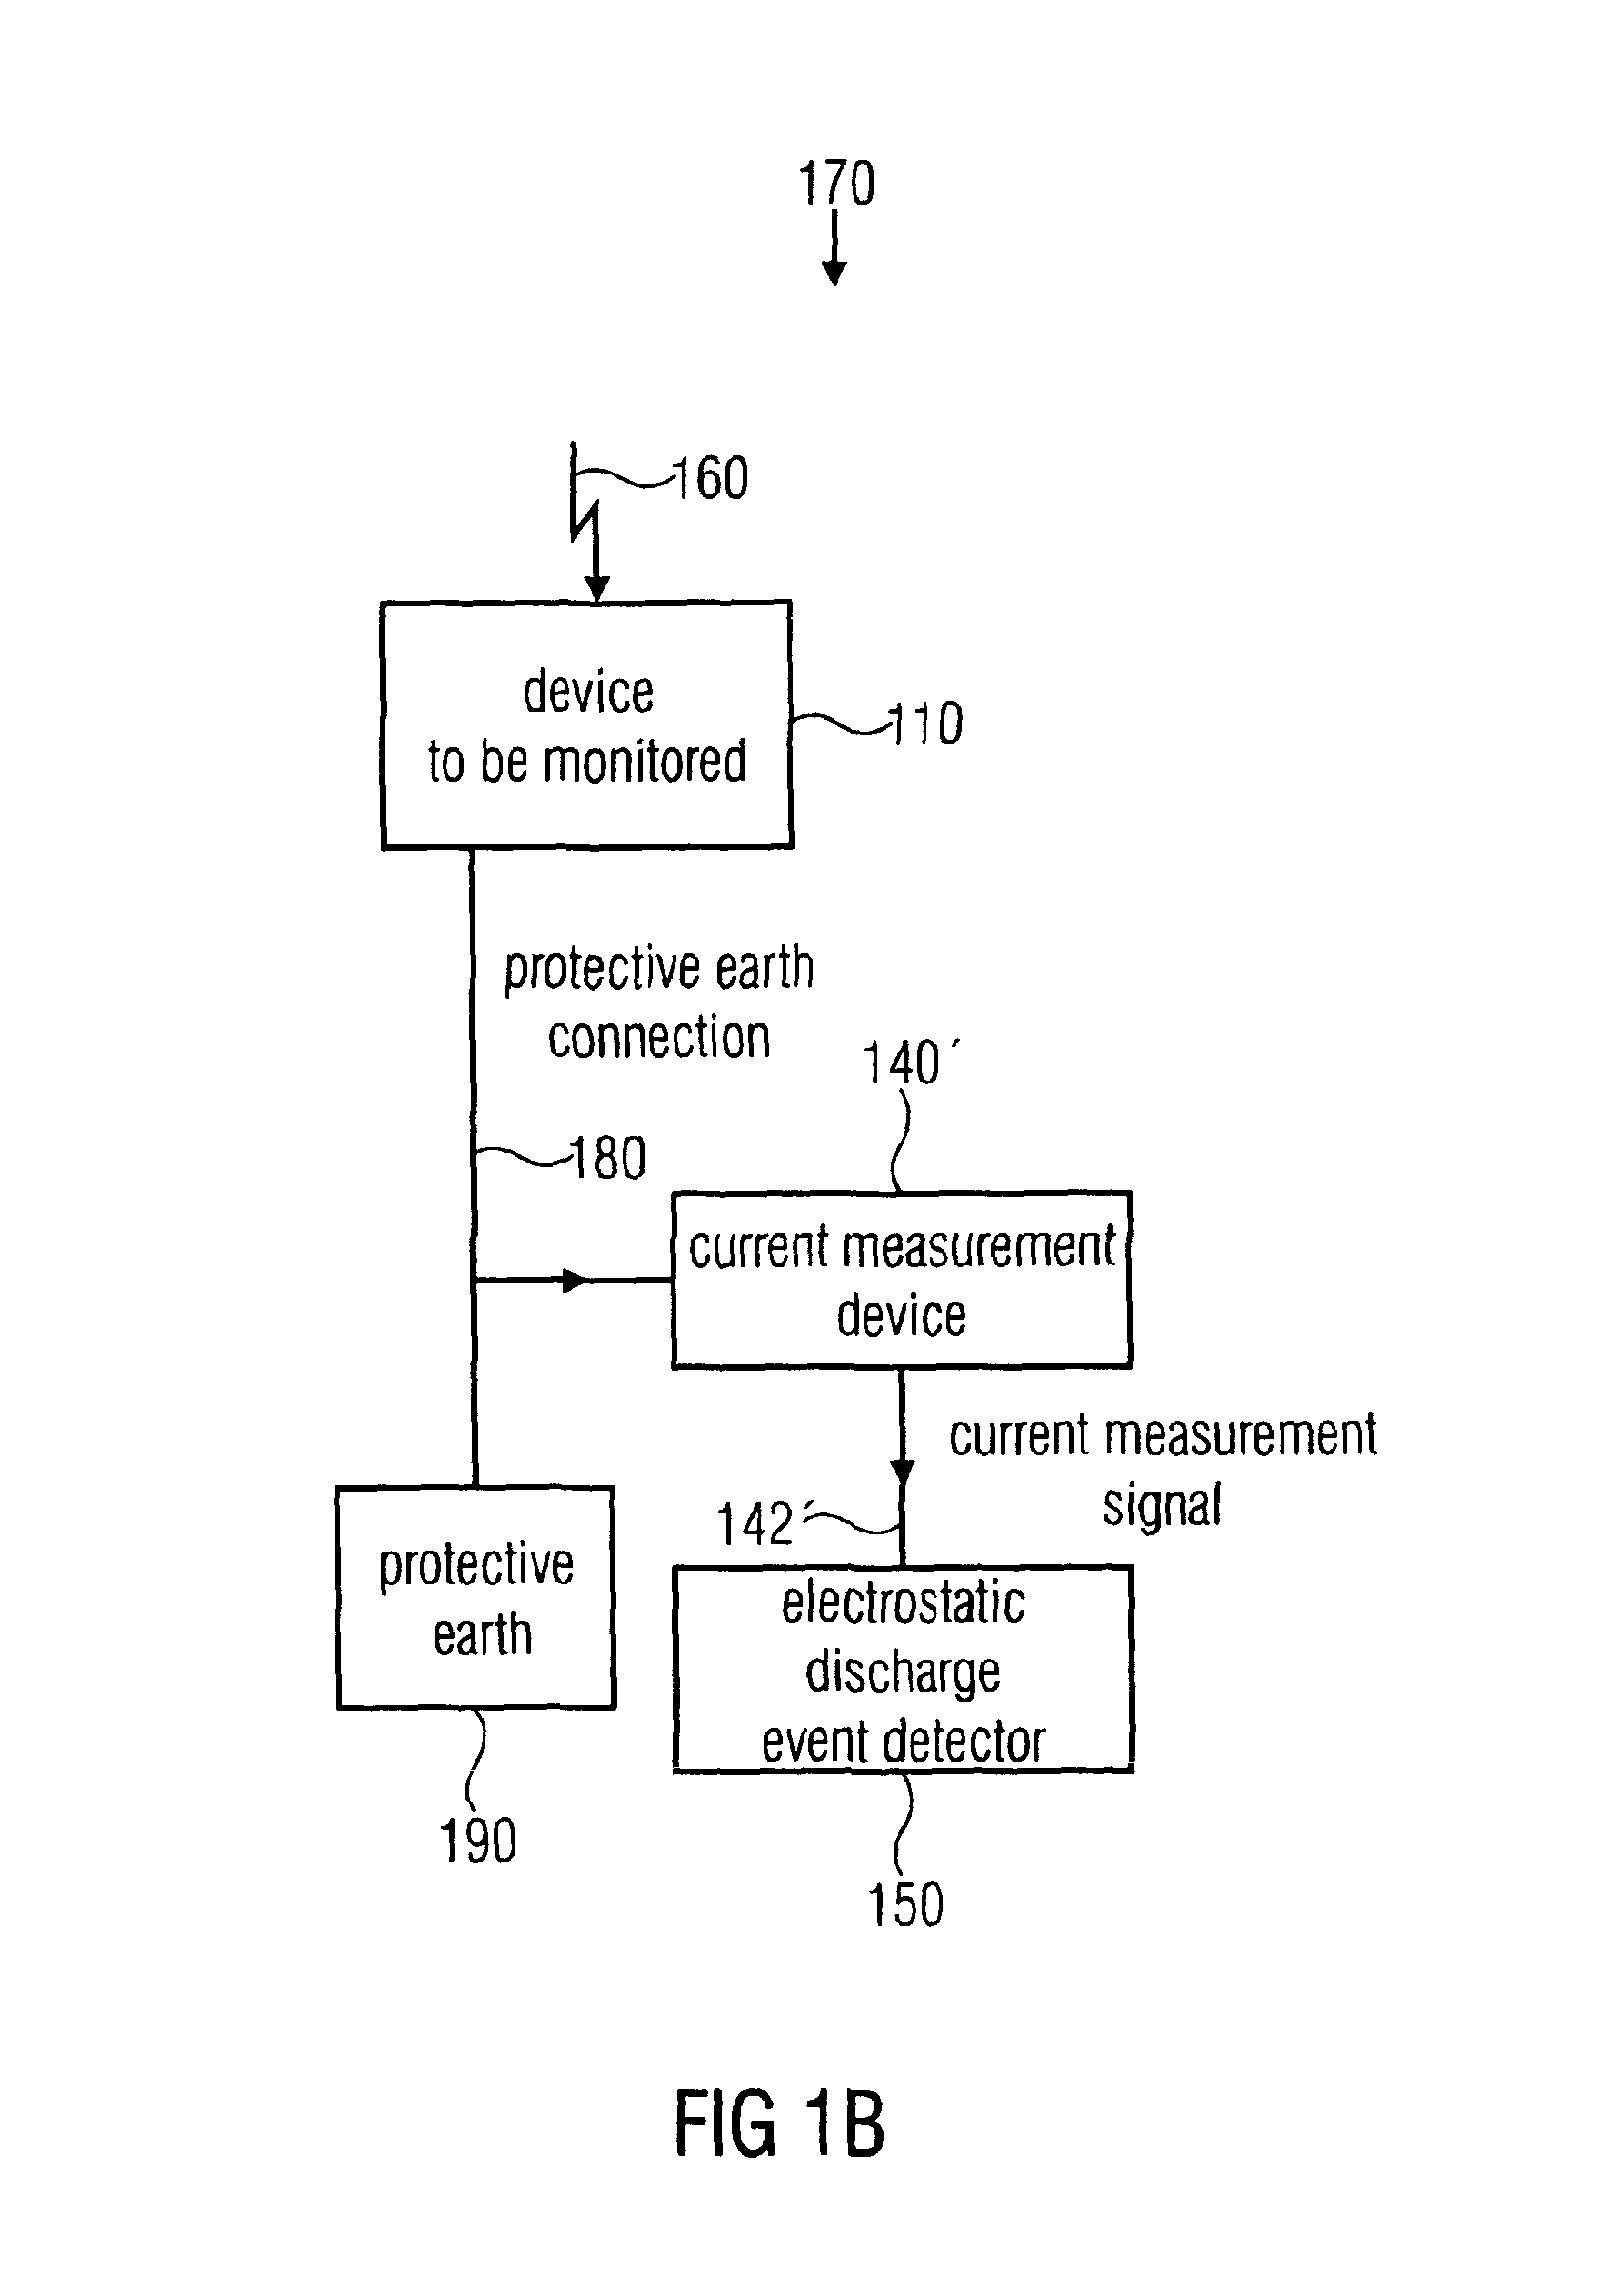 System, method and computer program for detecting an electrostatic discharge event